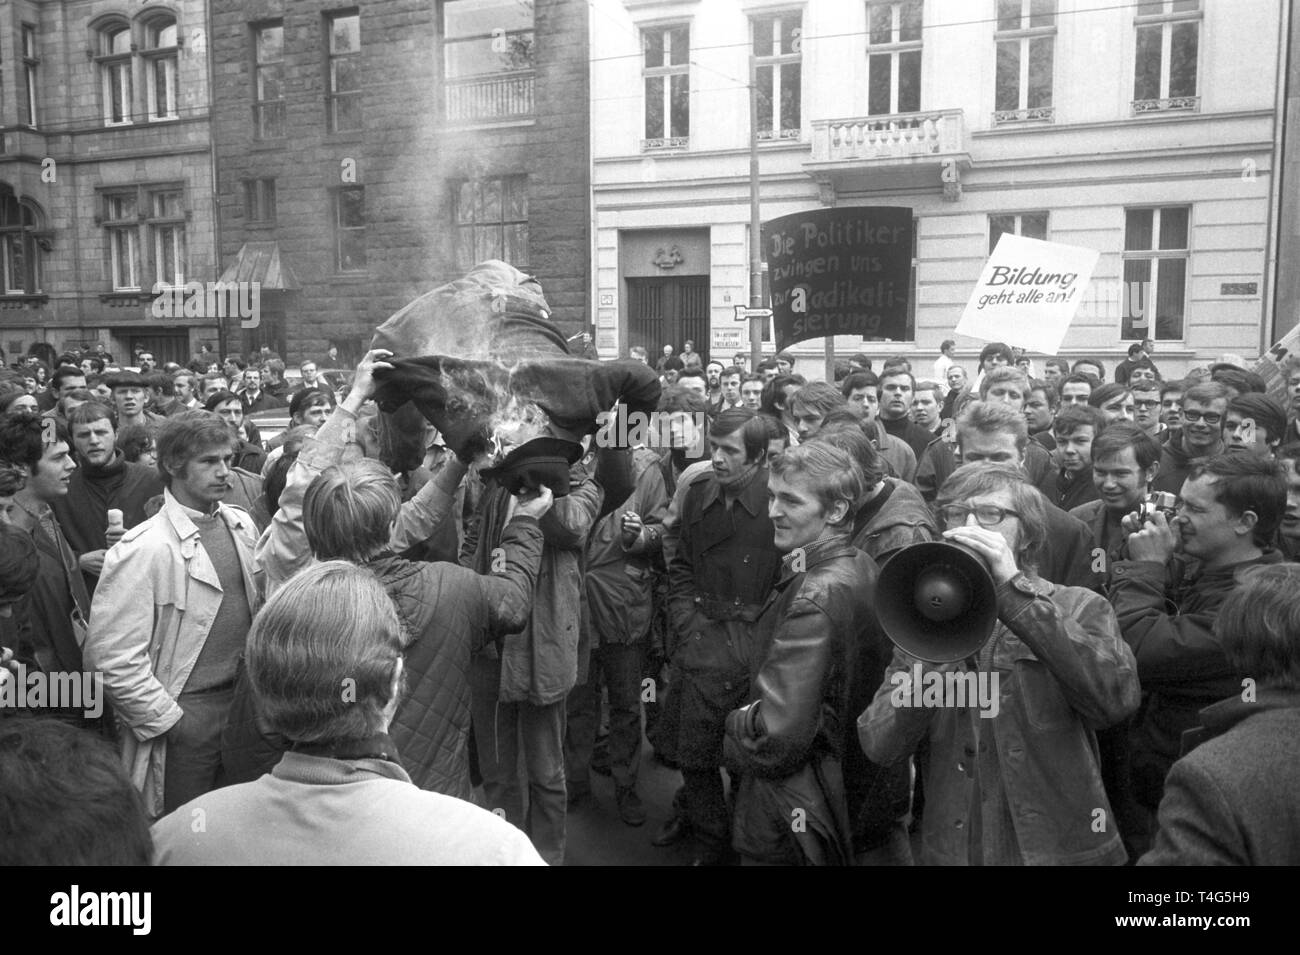 Students burn a straw doll. About 700 students demonstrate against a draft of the Higher Education Act on 23 April 1969 in Duesseldorf. | usage worldwide Stock Photo